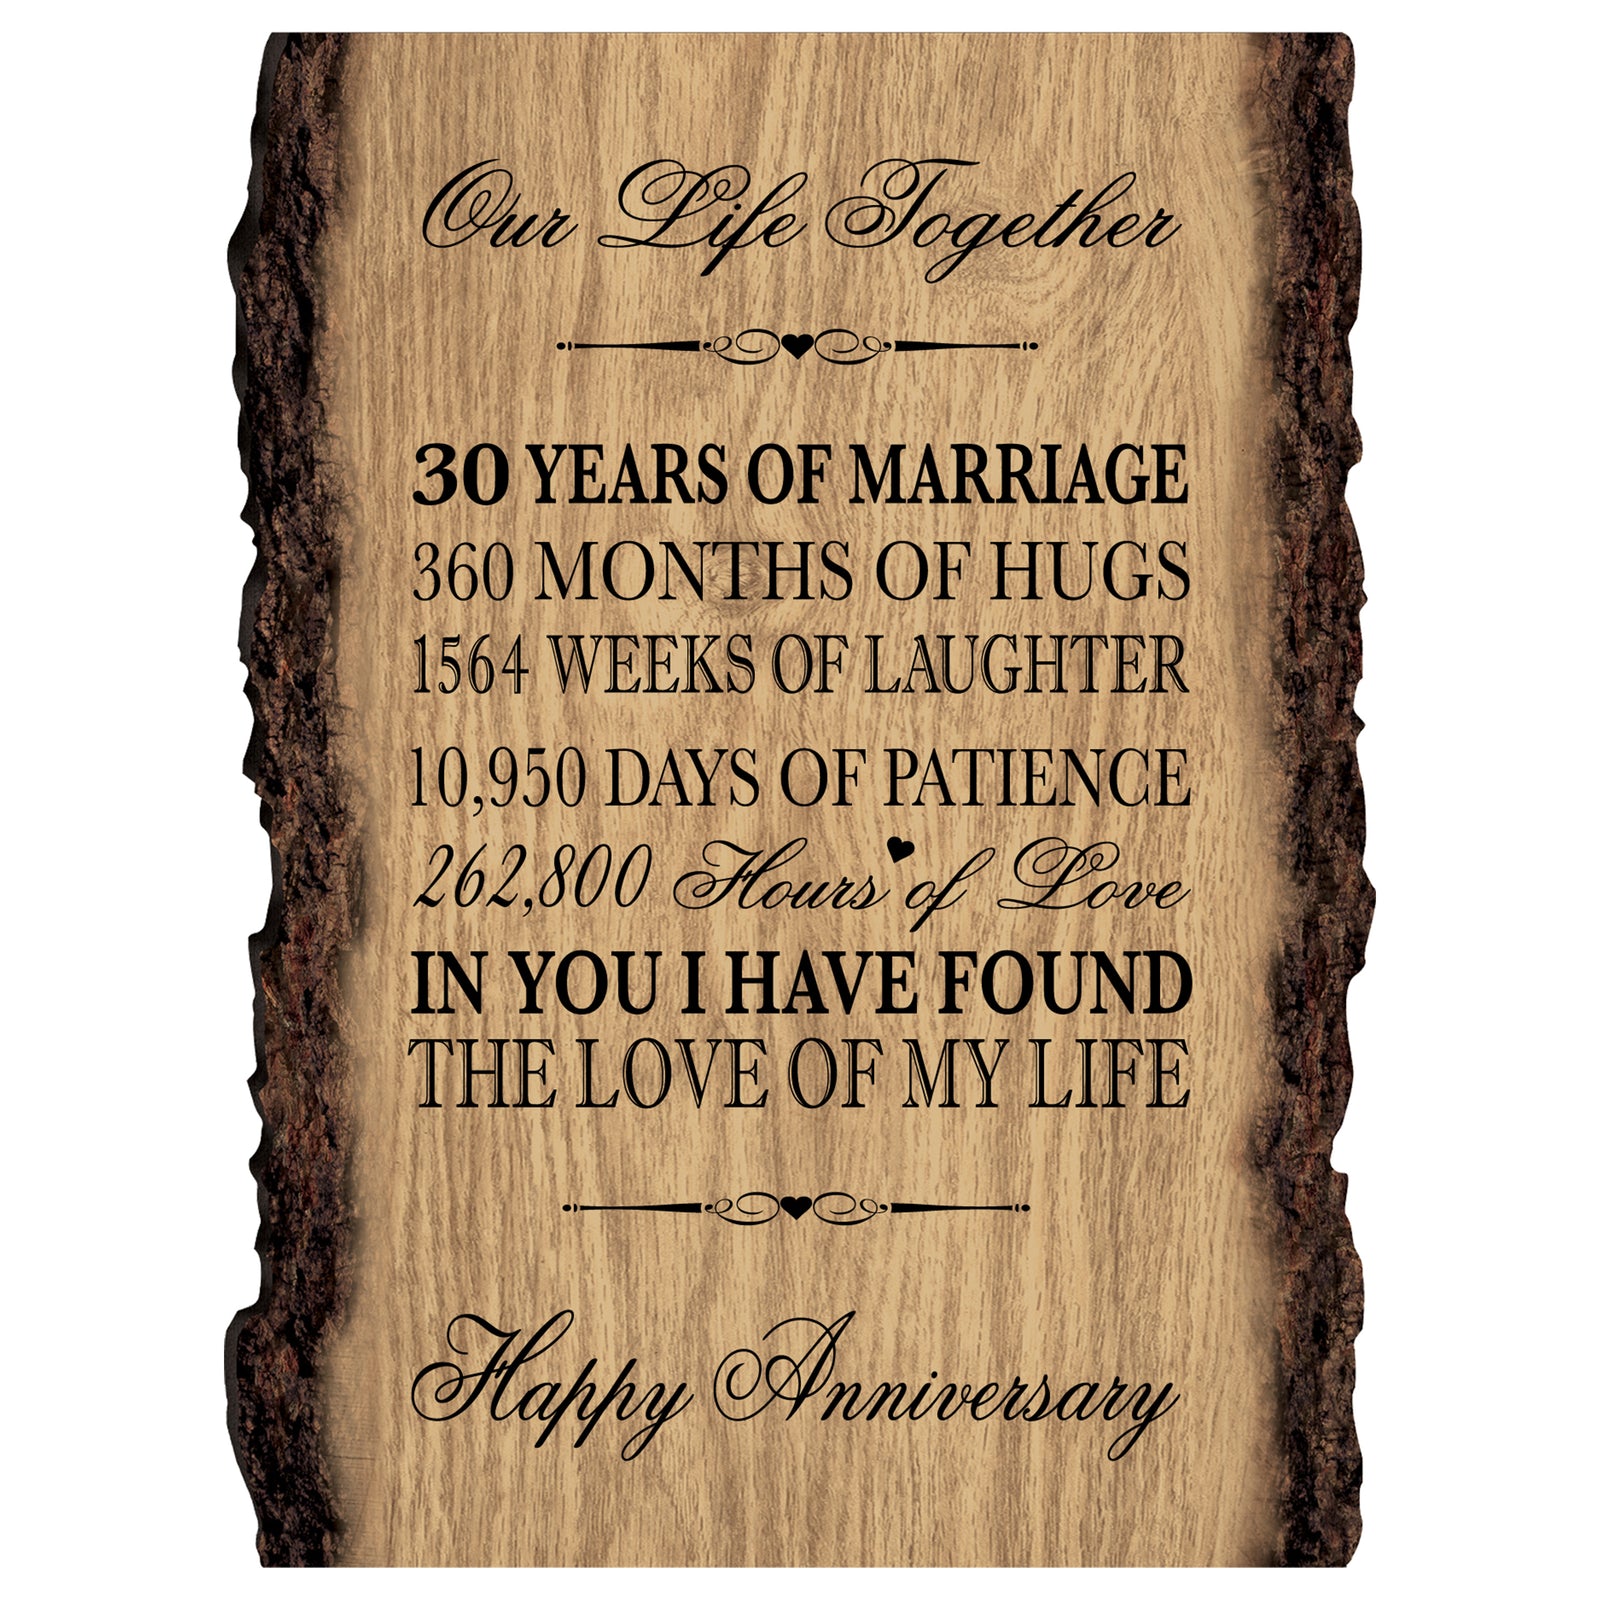 Rustic Wedding Anniversary 9x12 Barky Wall Plaque Gift For Parents, Grandparents New Couple - 30 Years Of Marriage